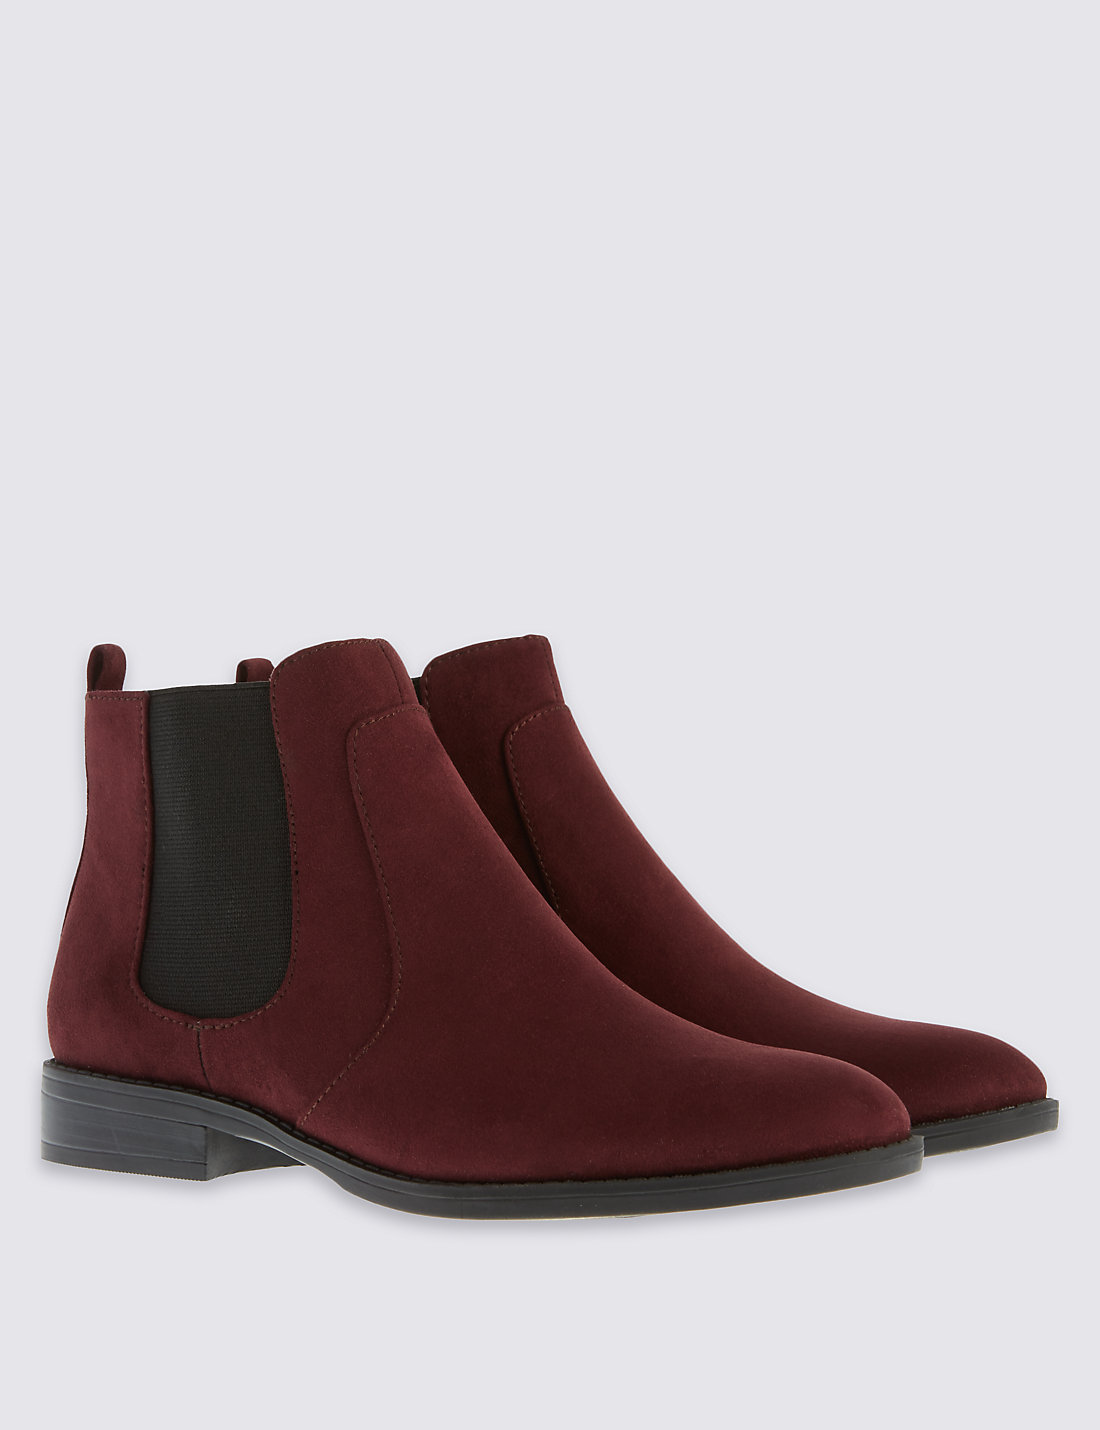 Shoes and boots to buy now for Autumn 2016